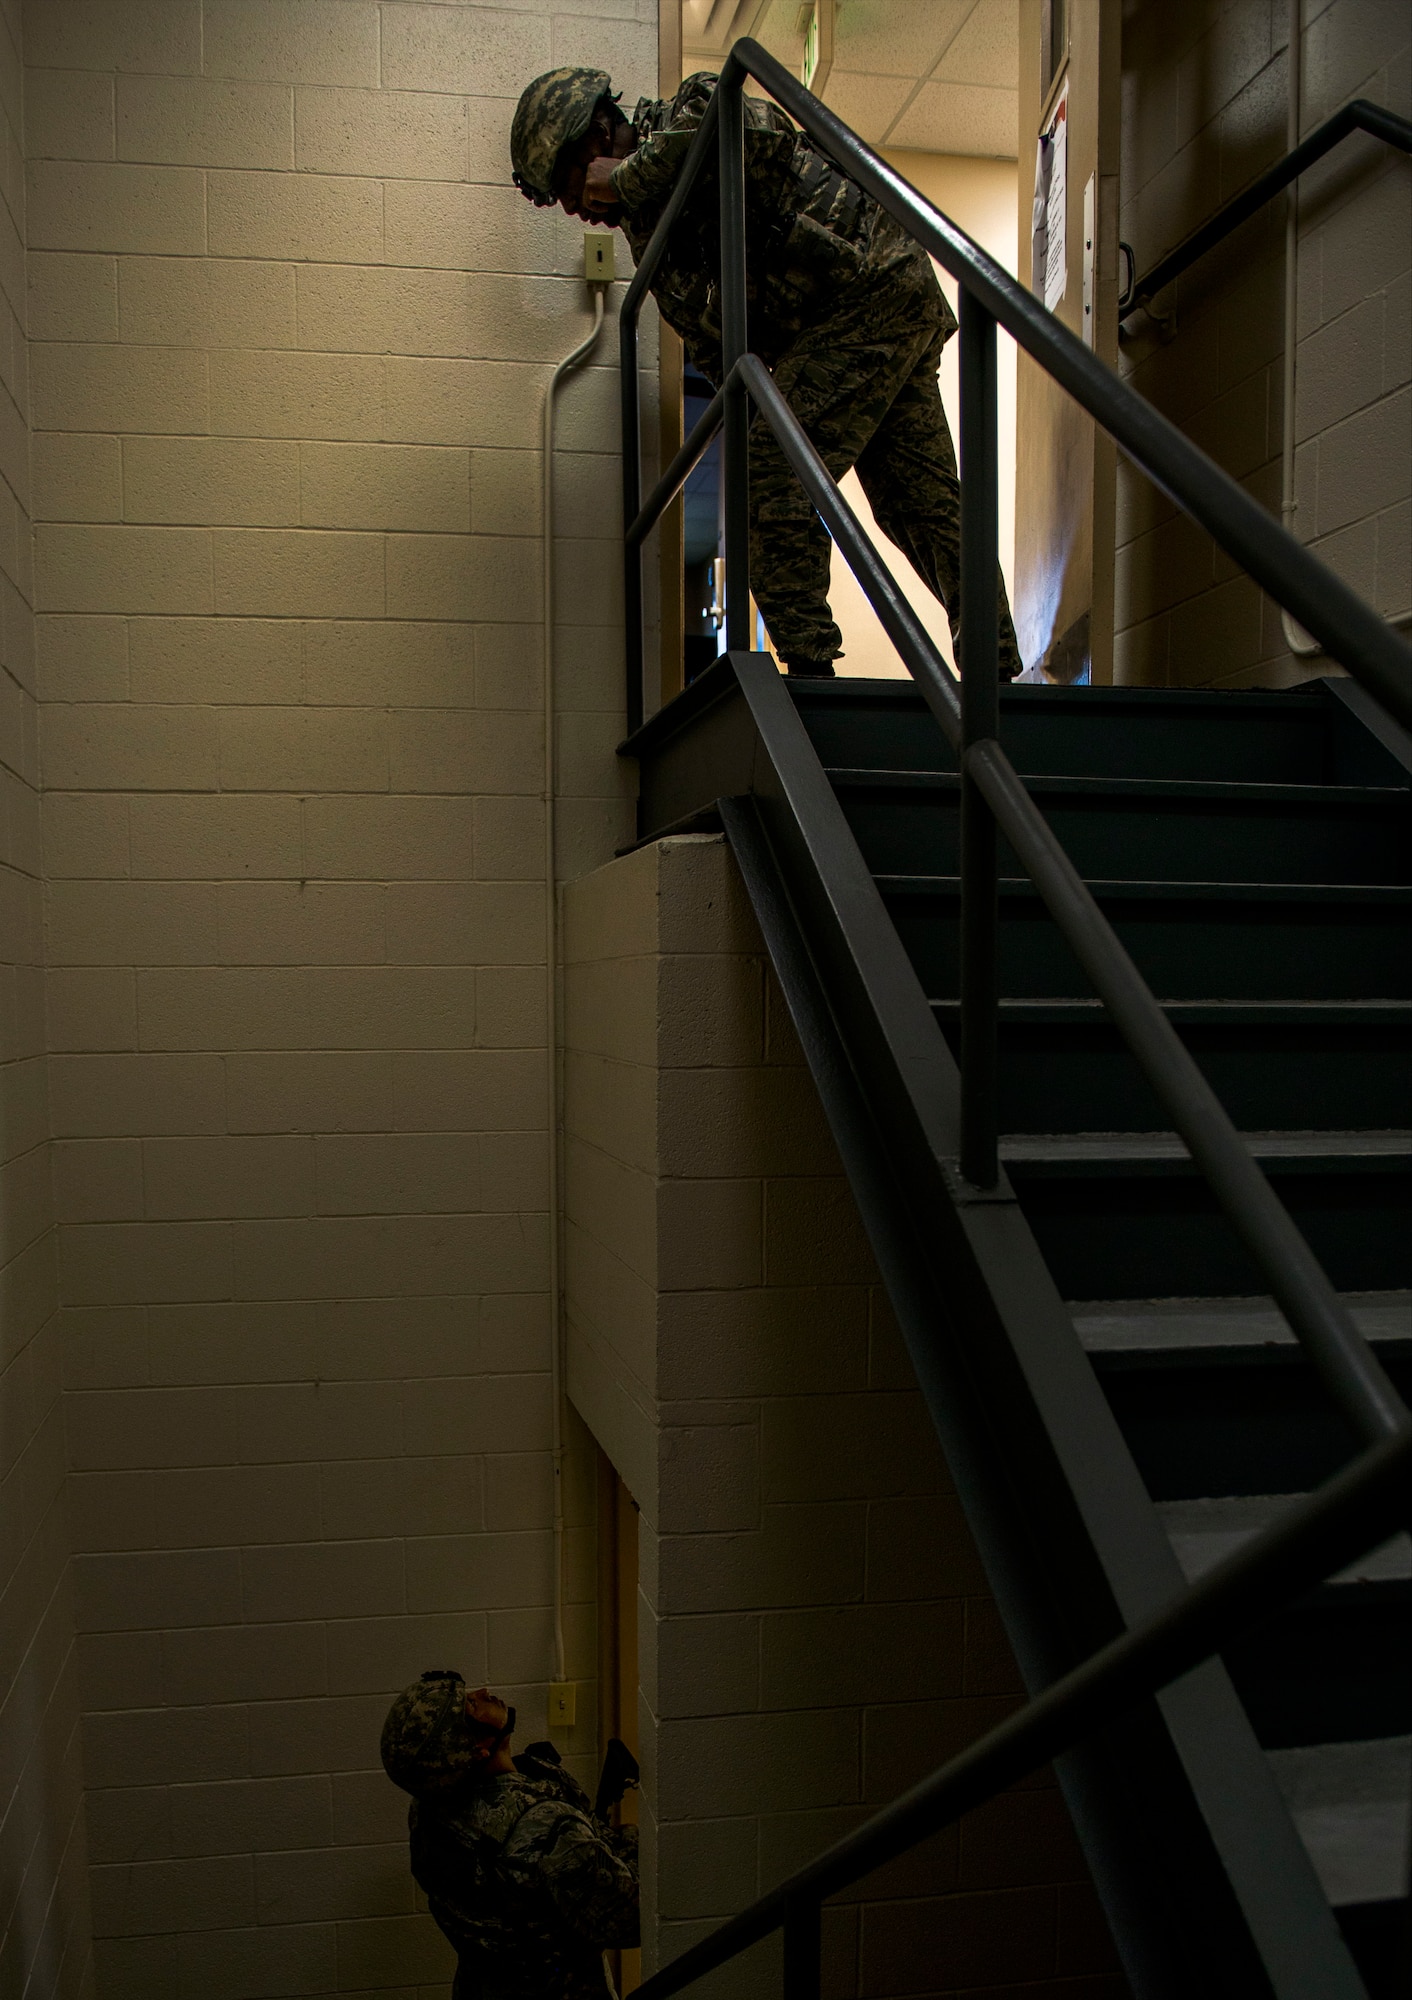 Tech. Sgt. Jeremy McCarty, 375th Security Forces Squadron, communicates with another first responder during an active shooter exercise, Scott Air Force Base, Ill., Sept. 9, 2016.  With an increase of mass shootings, the Department of Defense has trained personnel and first responders on how to respond in an active shooter situation.